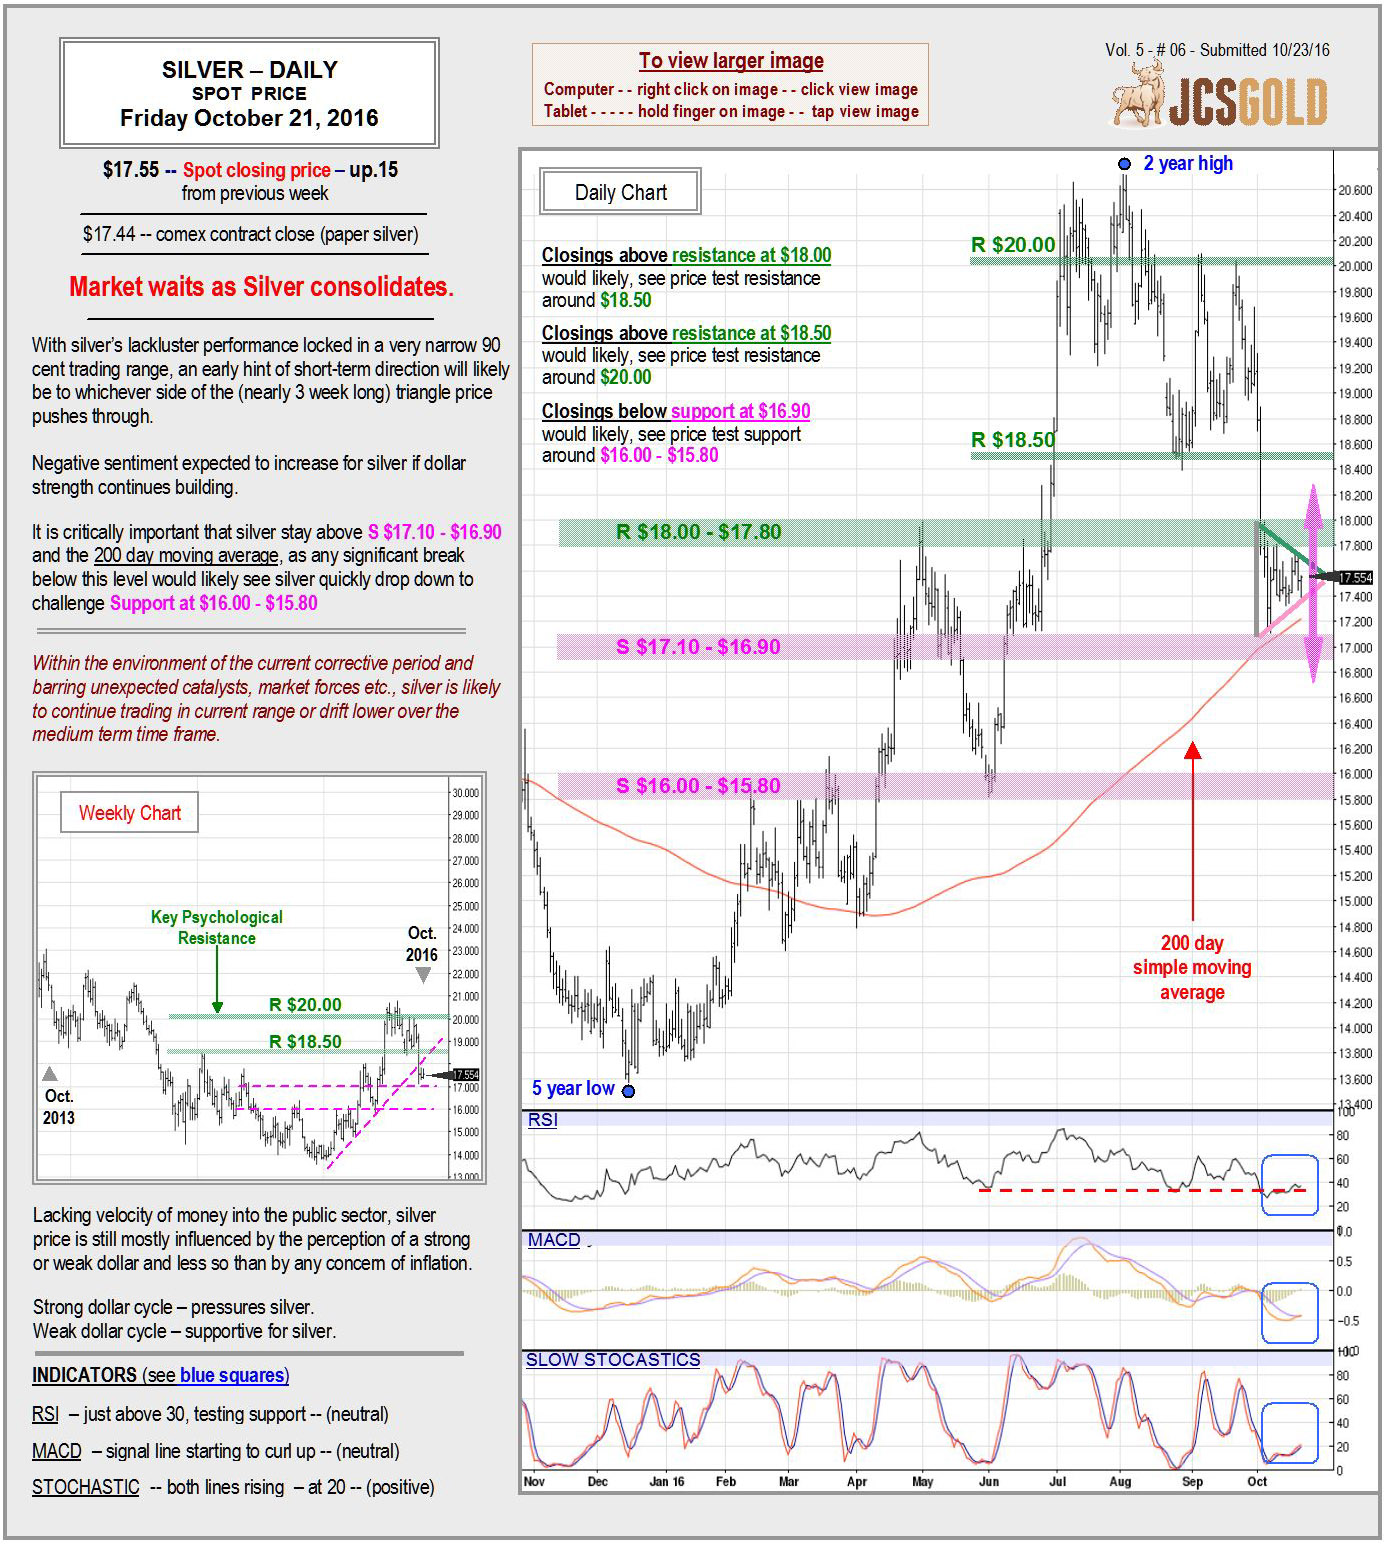 Oct 21, 2016 chart & commentary